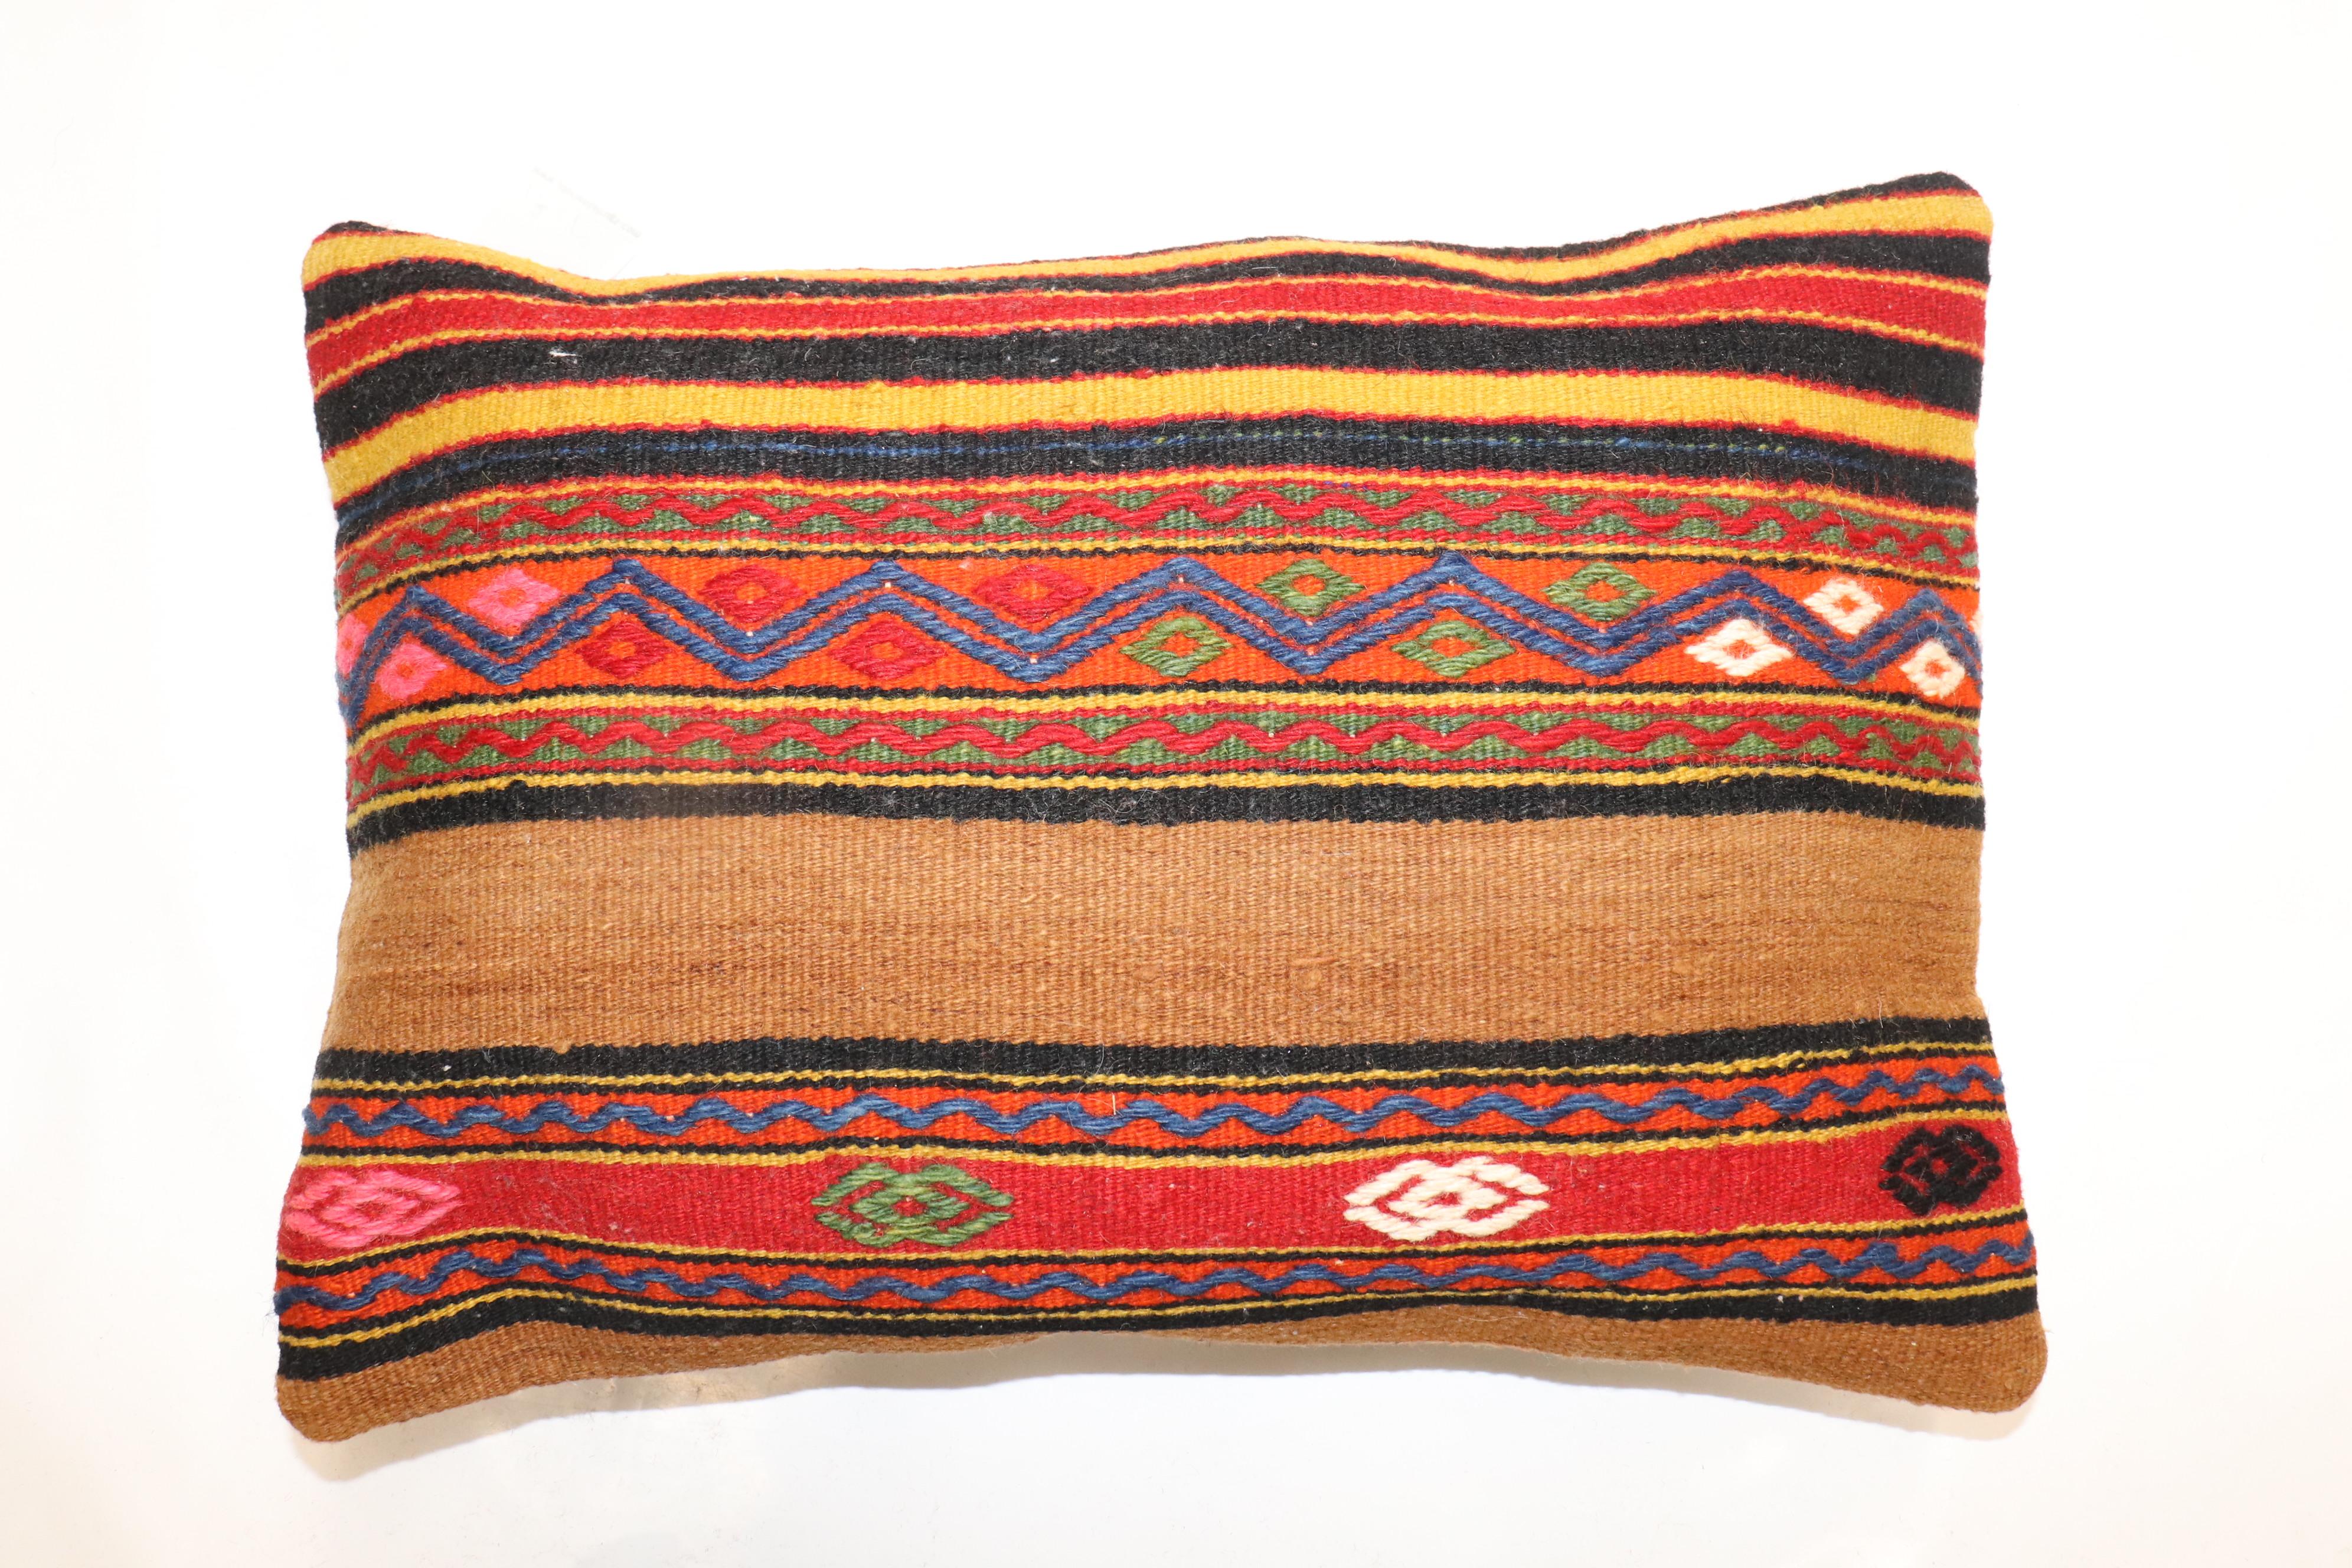 Pillow made from a vintage Turkish Kilim with a cotton back. Zipper closure and foam insert provided. 

Measures: 14'' x 20''.